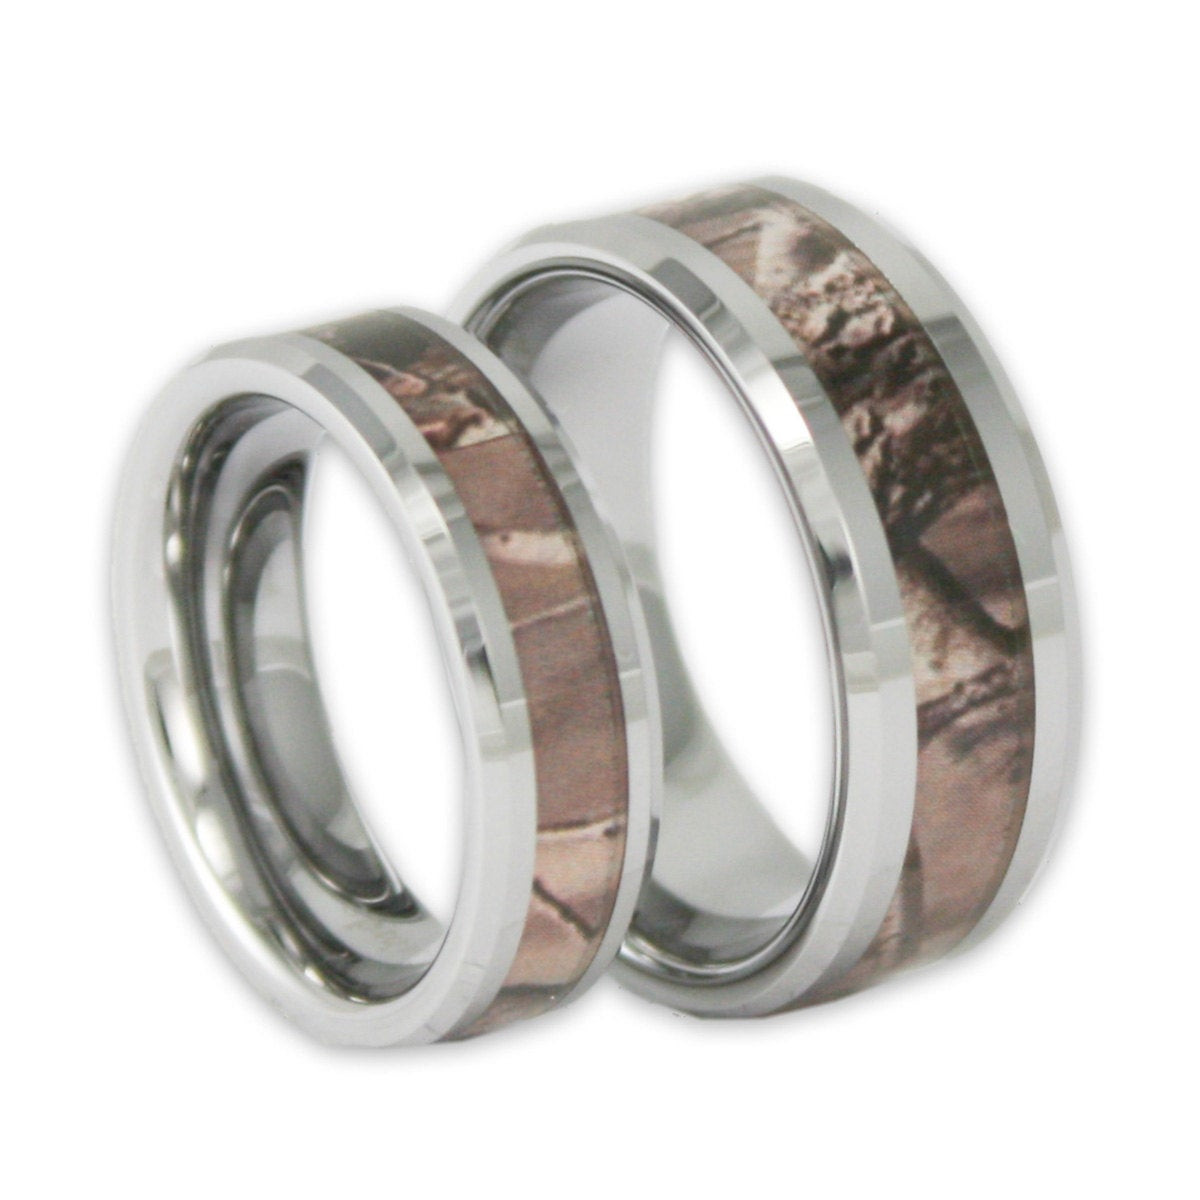 Couples Wedding Ring Sets
 Couples Tree Camo Wedding Ring Set His and Hers Matching